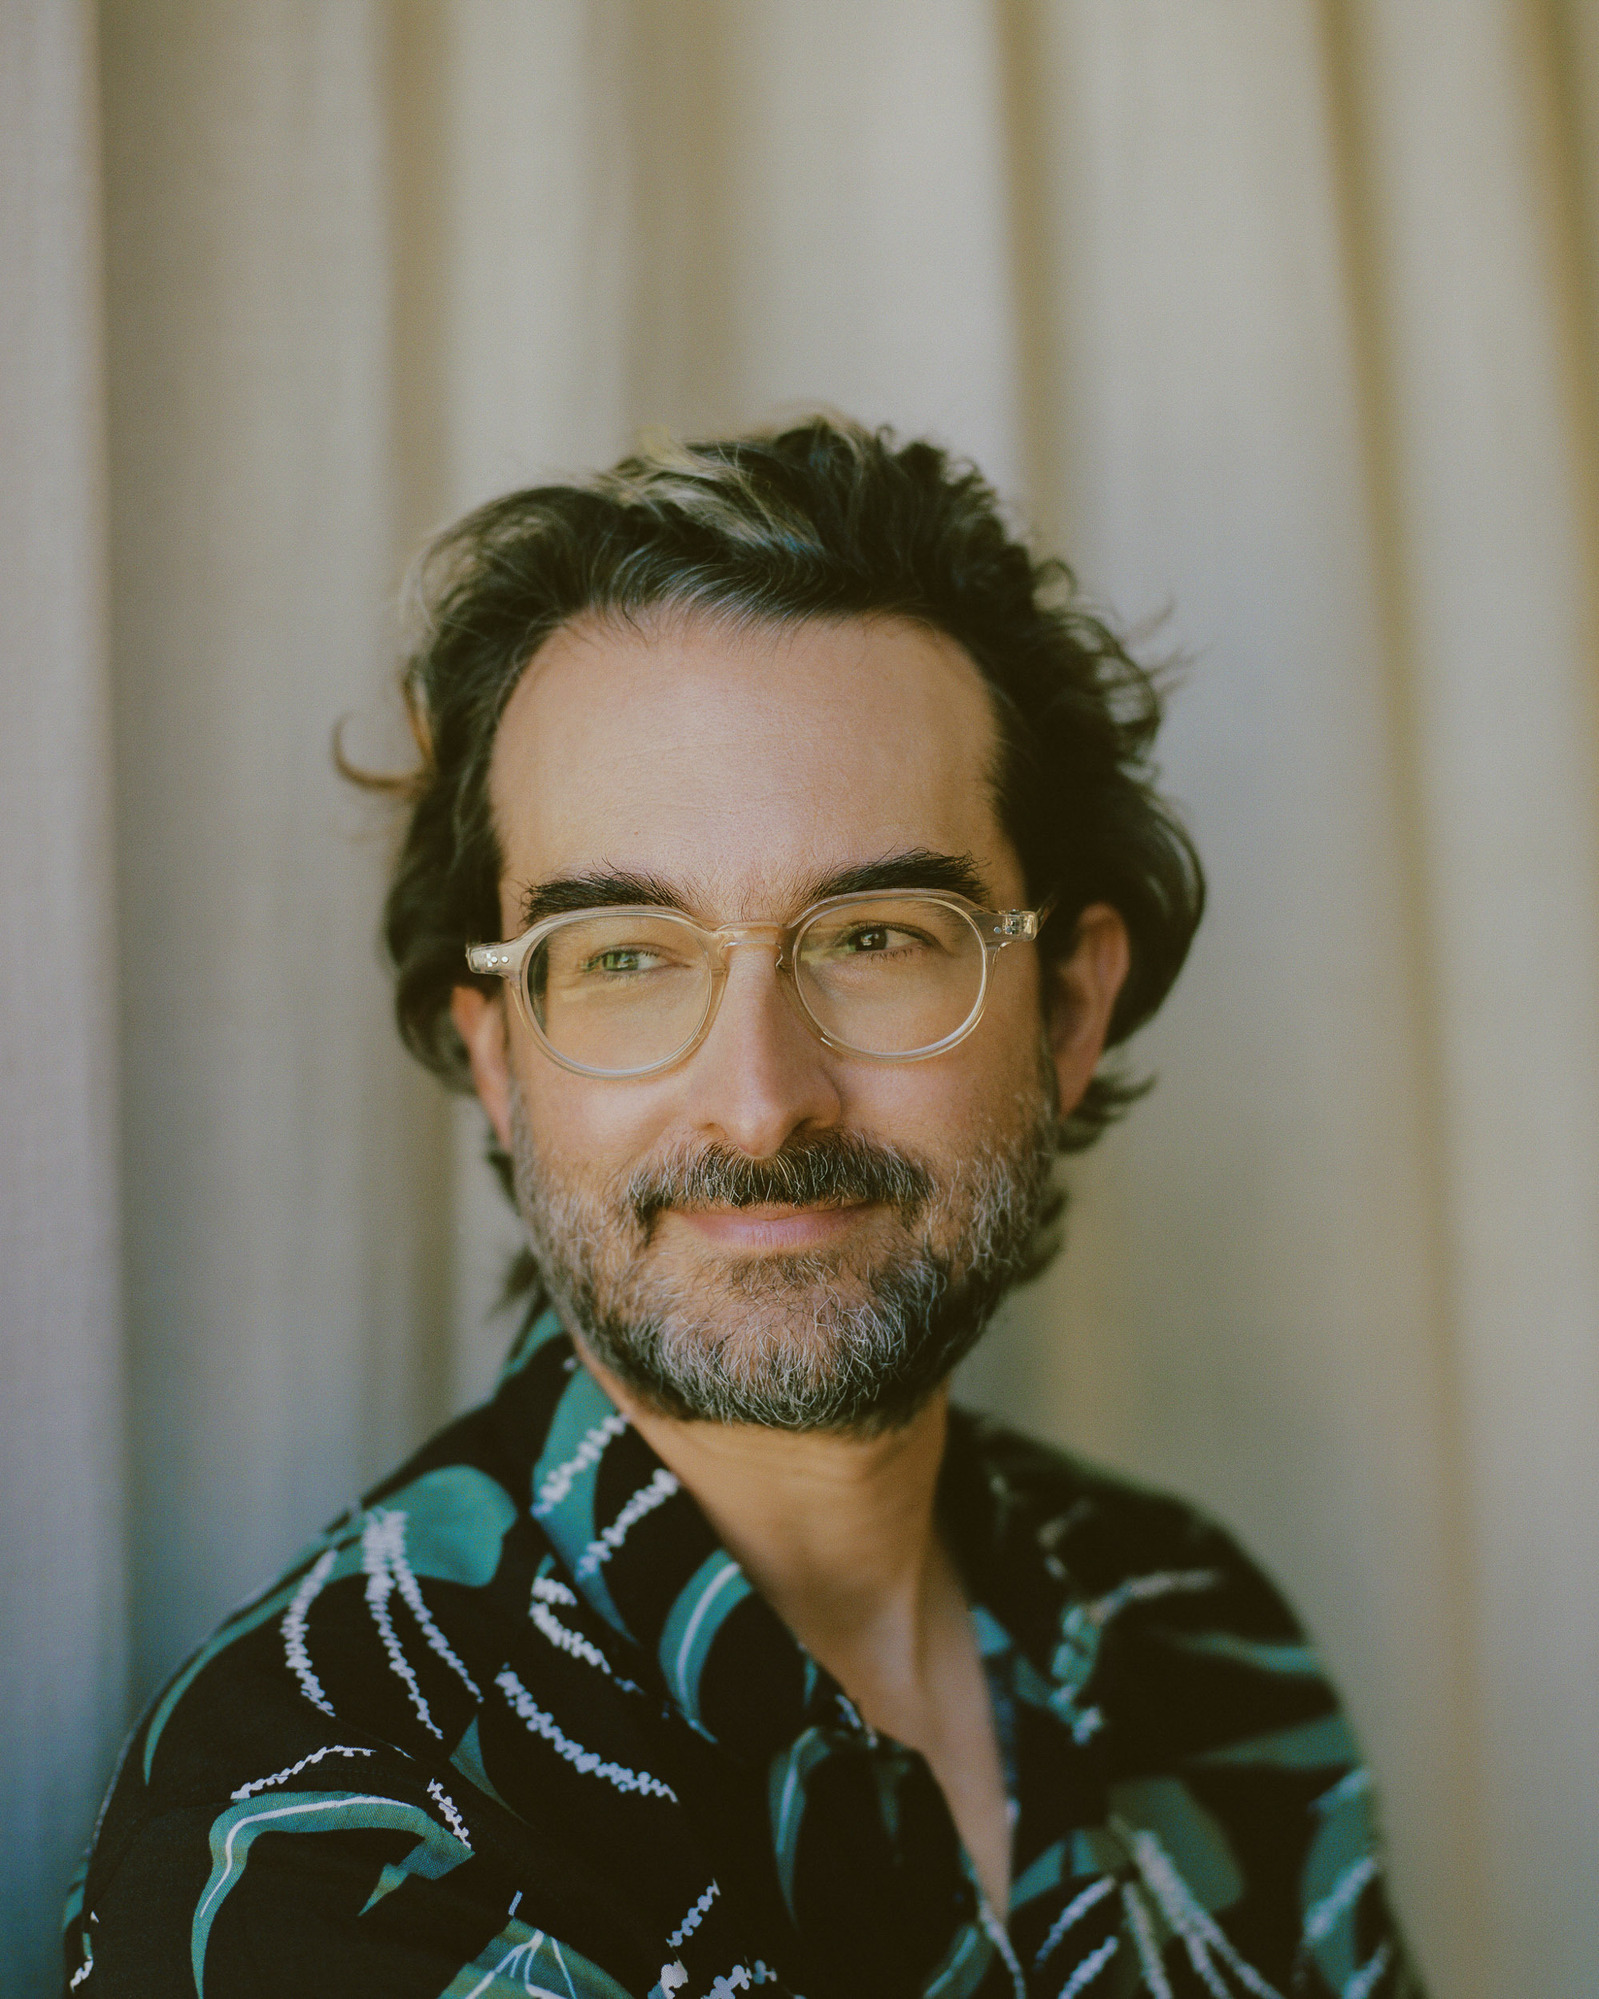 Jay Duplass Doesn’t Want to Be a Coen Brother Anymore / Photos by Ryan Pfluger for The New Yorker